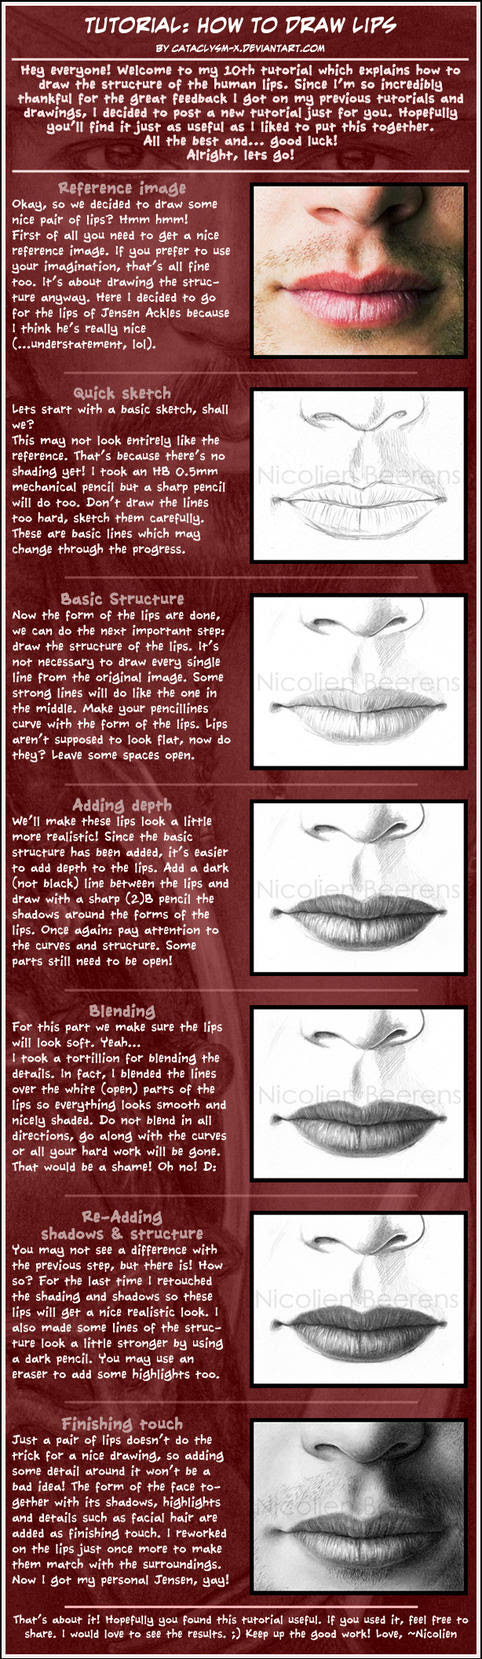 Images of lips to draw x man